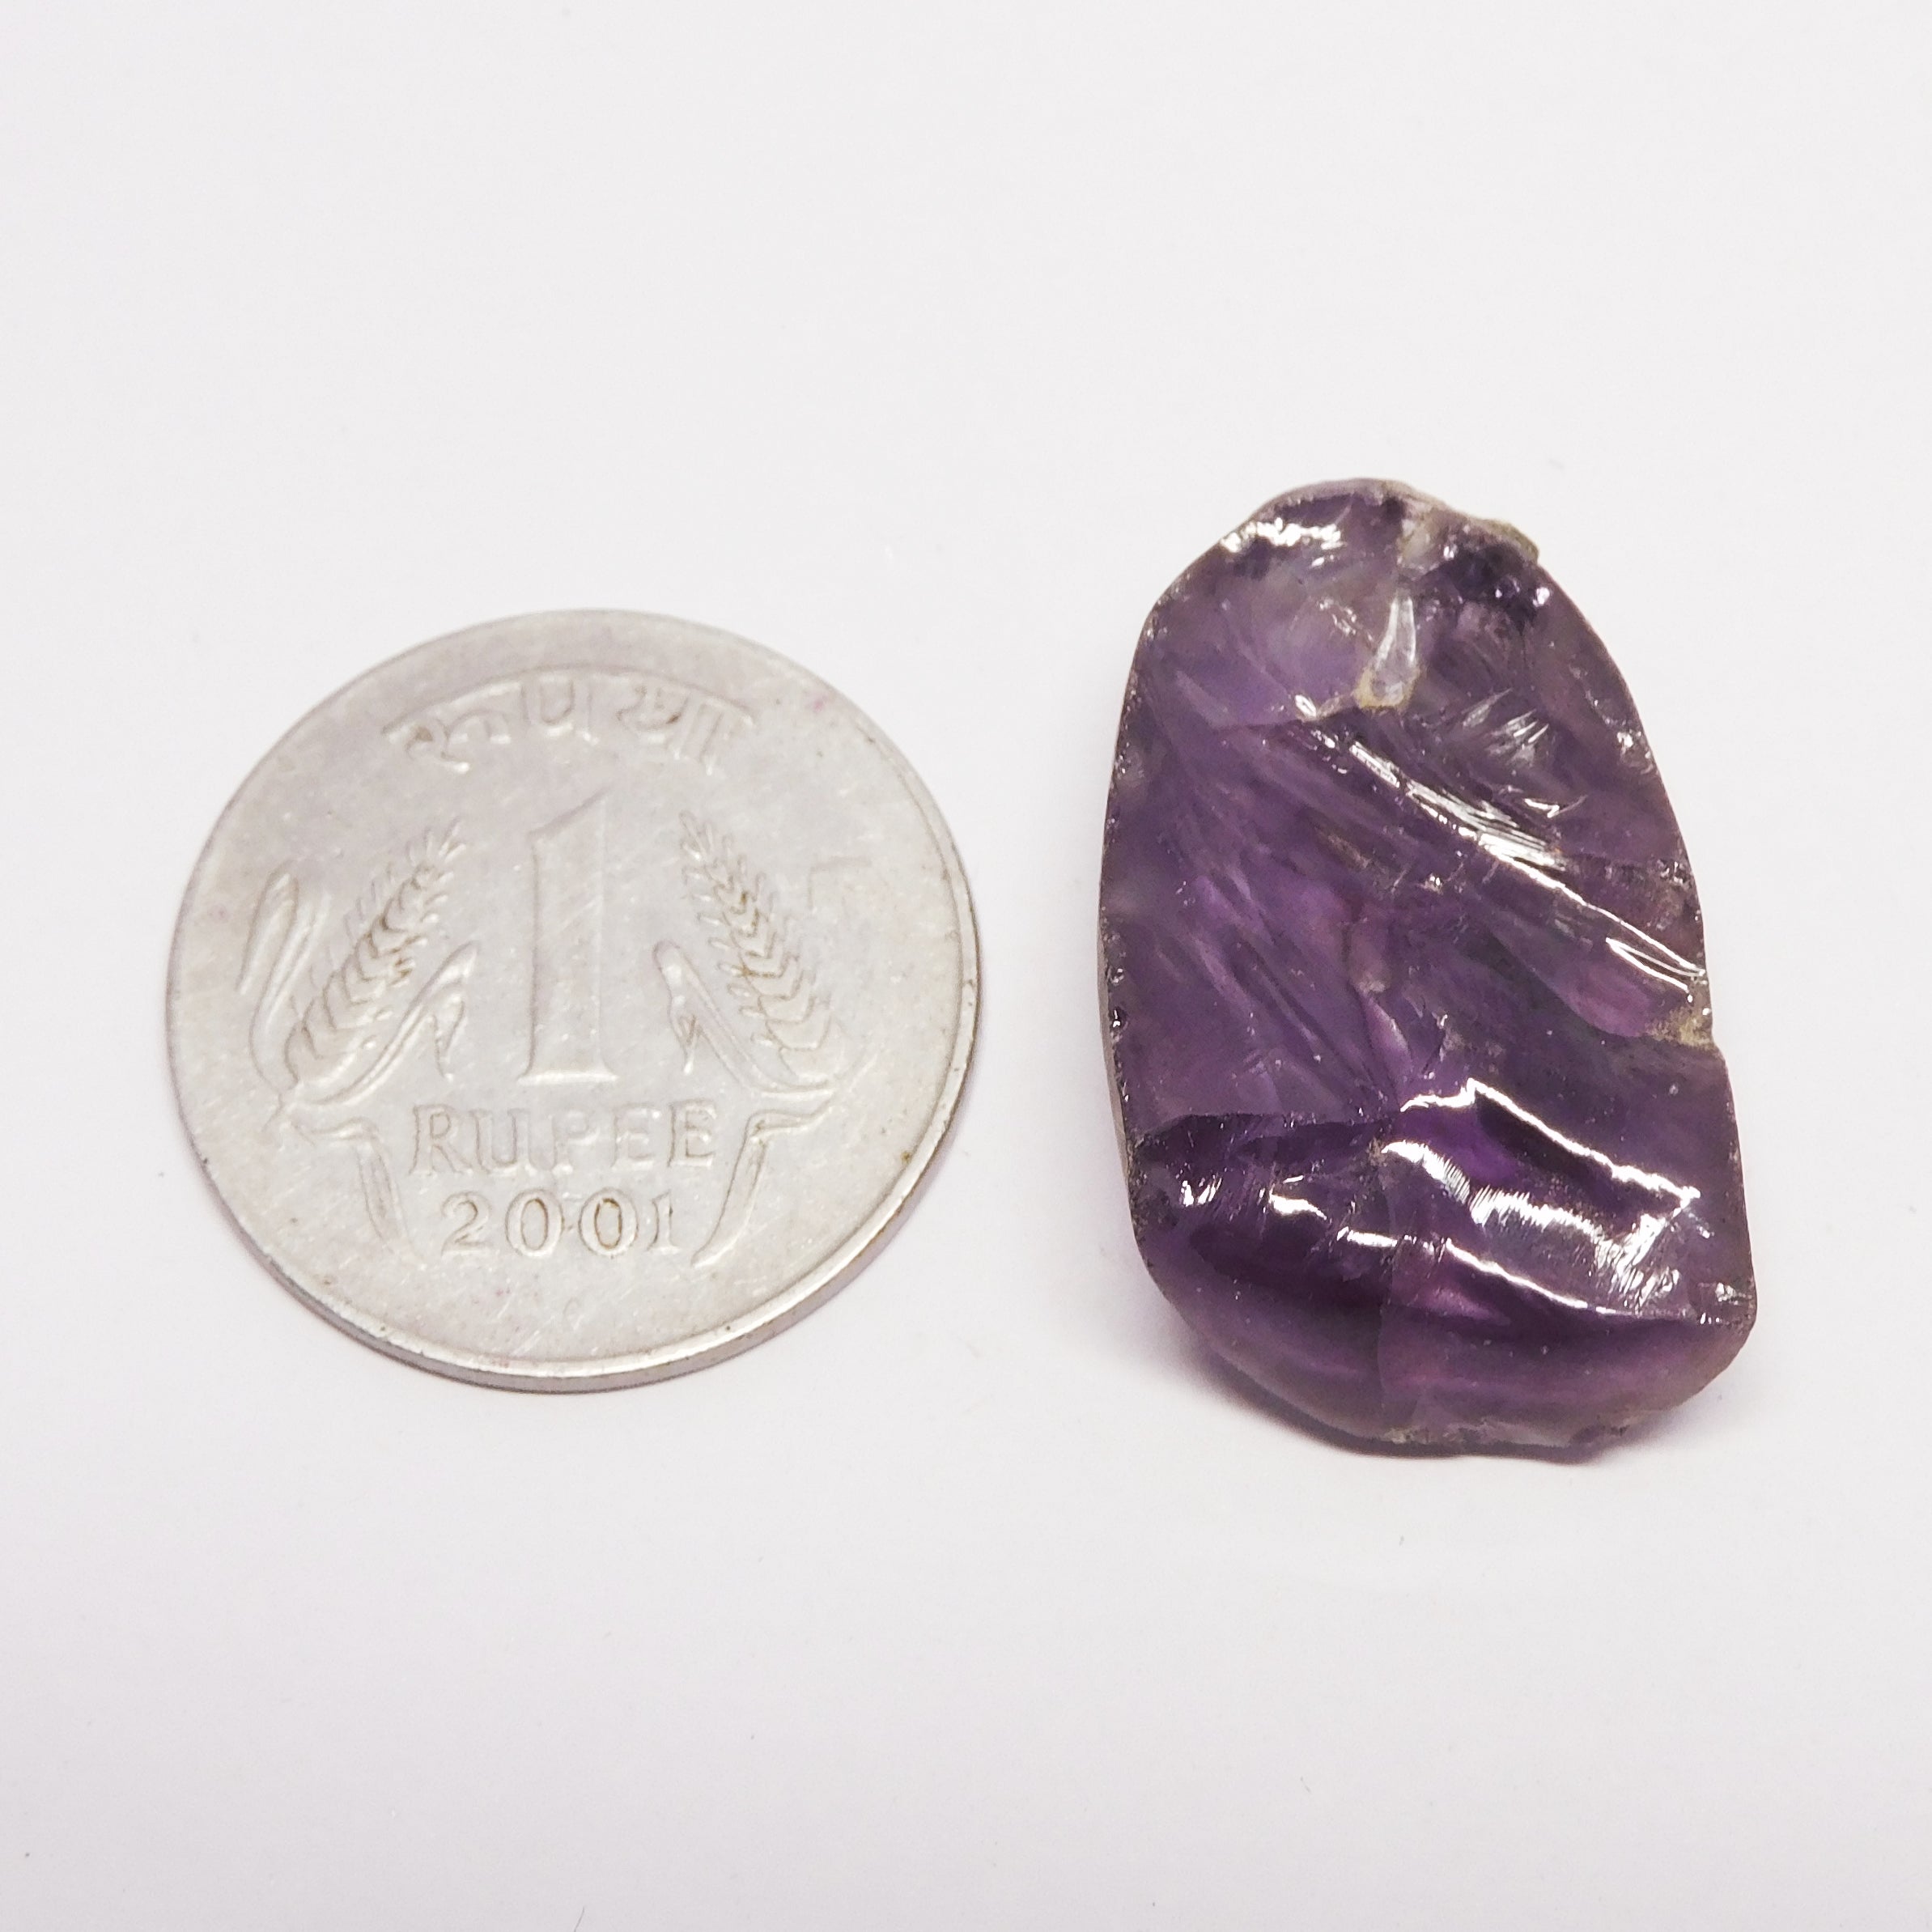 Special Offer On Alexandrite Rough !! 54.40 Carat Natural Color Change Alexandrite Rough From Russia Certified Loose Gemstone | Free Shipping Free Gift